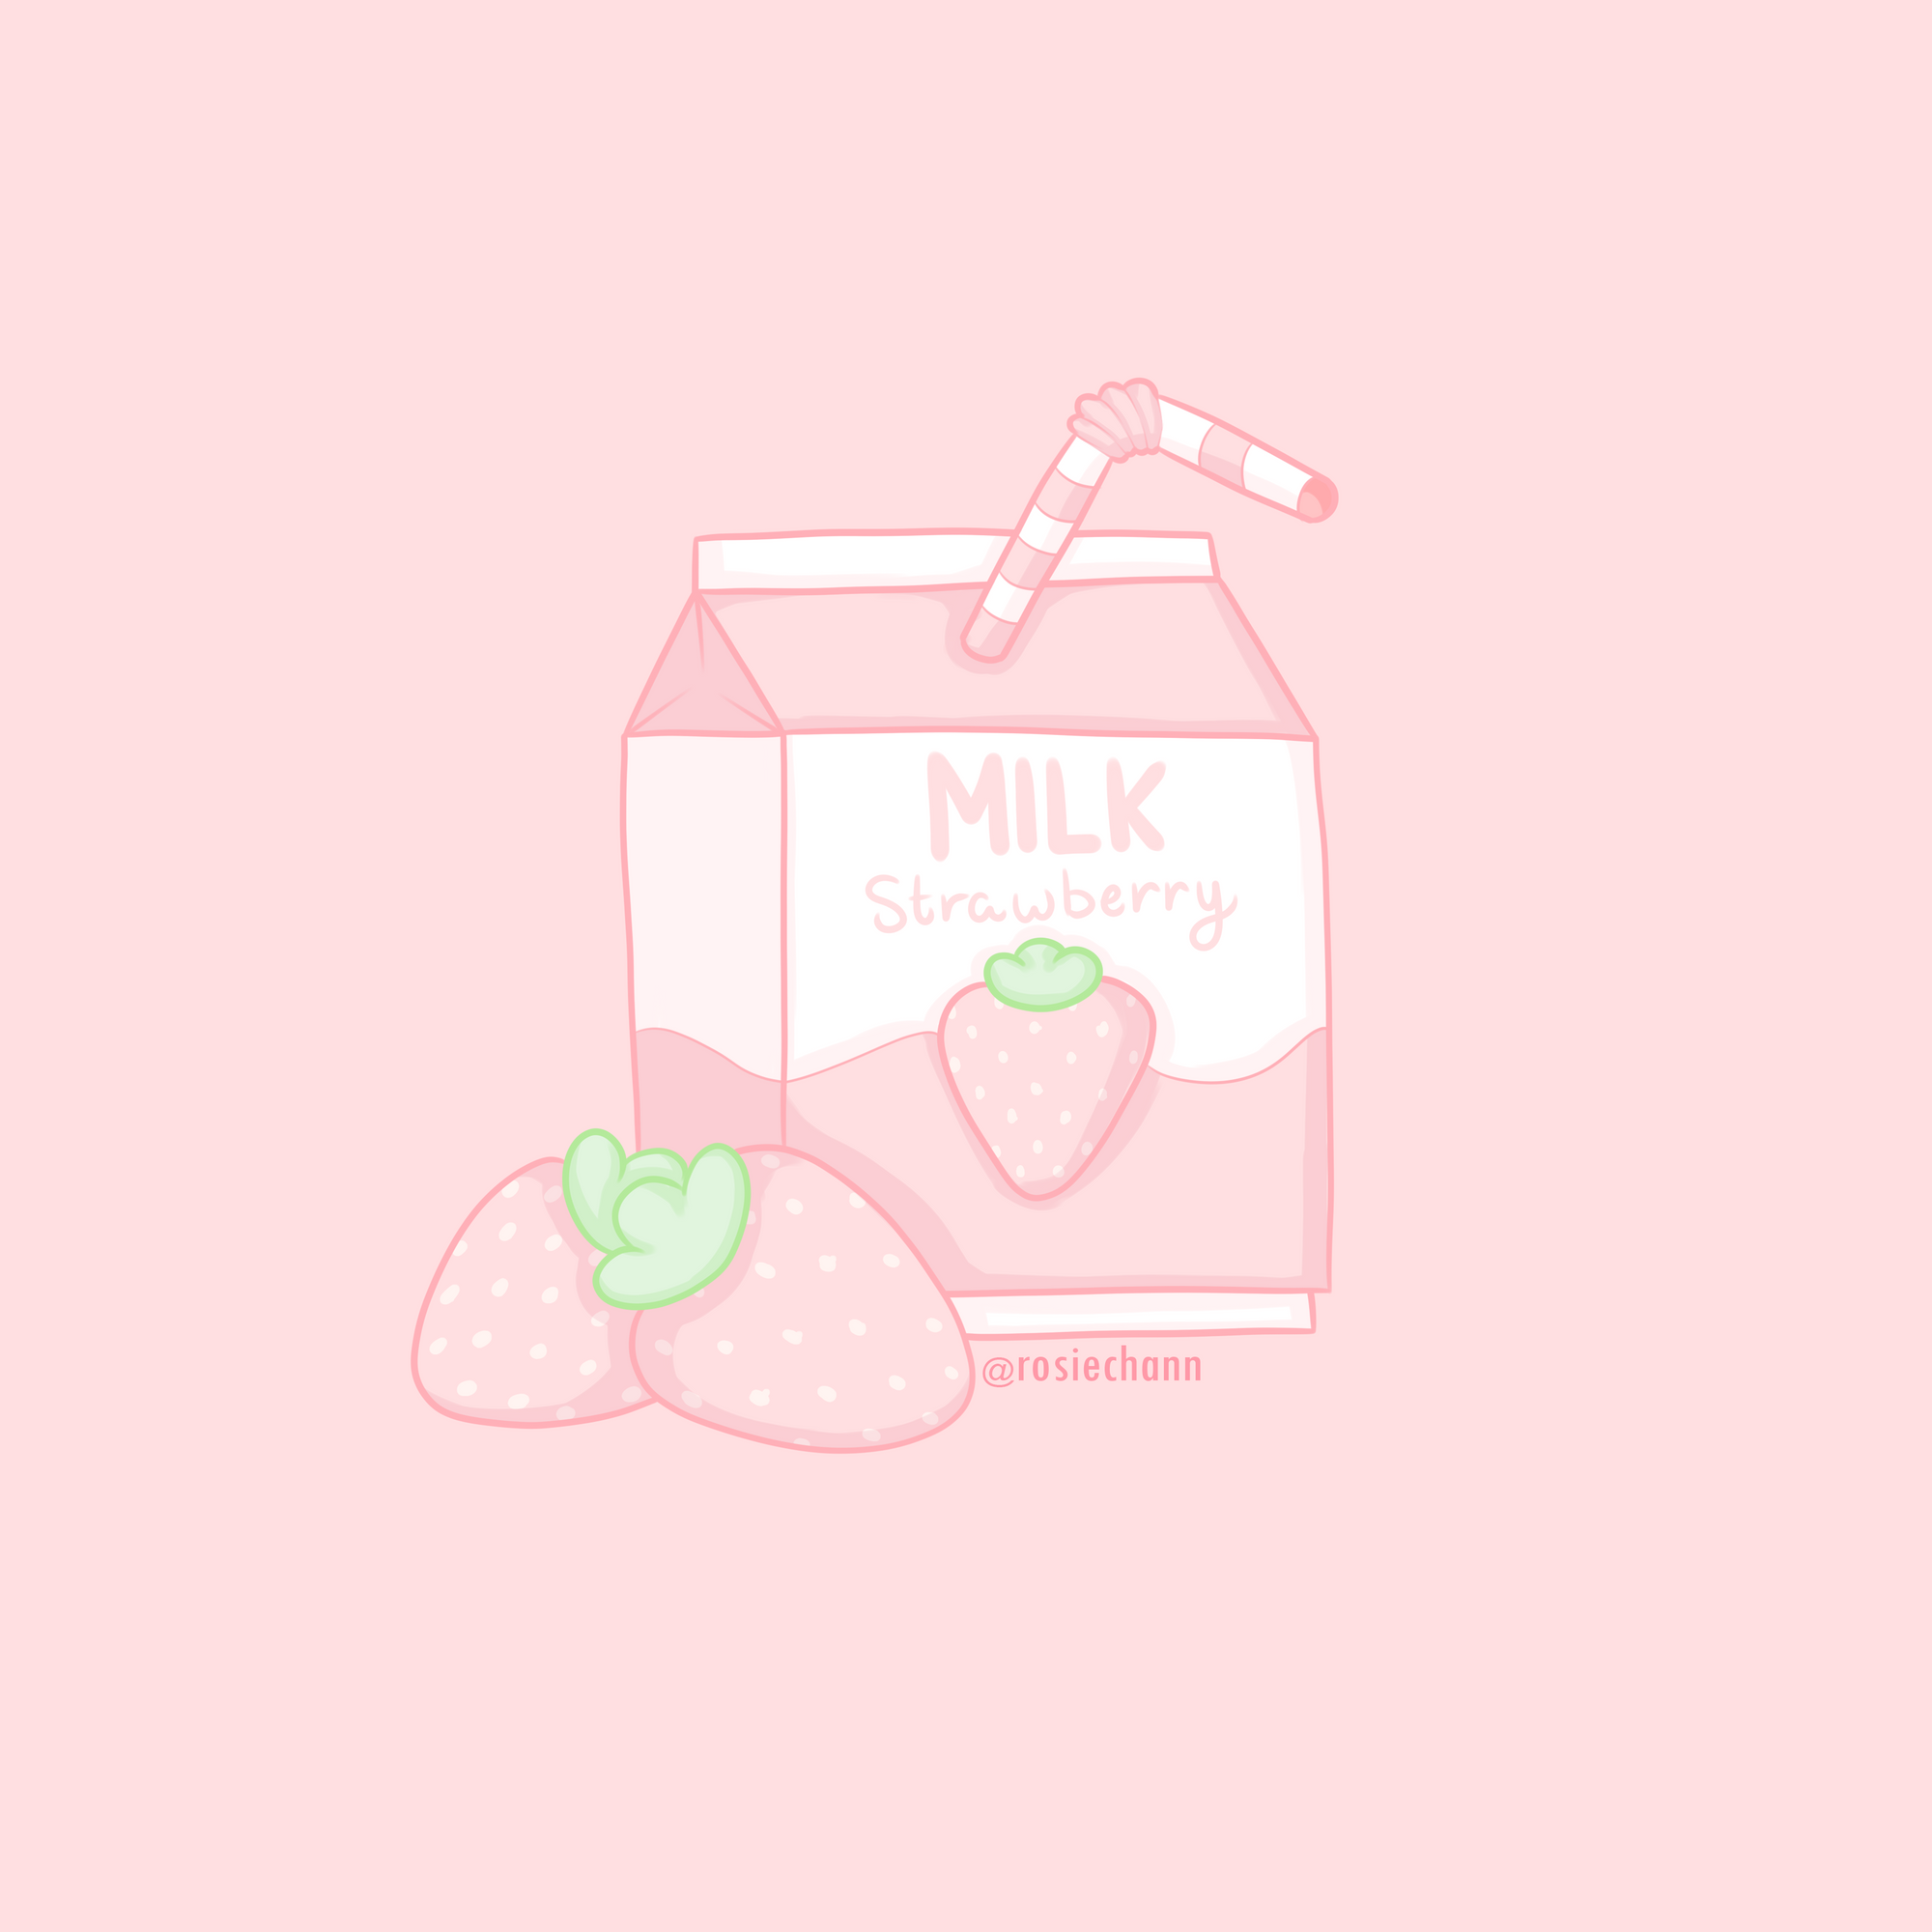 Pink Cow Strawberry Milk Kawaii Wallpapers Wallpaper Cave Strawberry milk, strawberry smoothie, strawberry fields, strawberries and cream, strawberry shortcake, angel aesthetic, pink aesthetic, head and pink red strawberry illustration in 2020 pink aesthetic aesthetic iphone wallpaper cute wallpaper backgrounds see more ideas about pixel art. pink cow strawberry milk kawaii